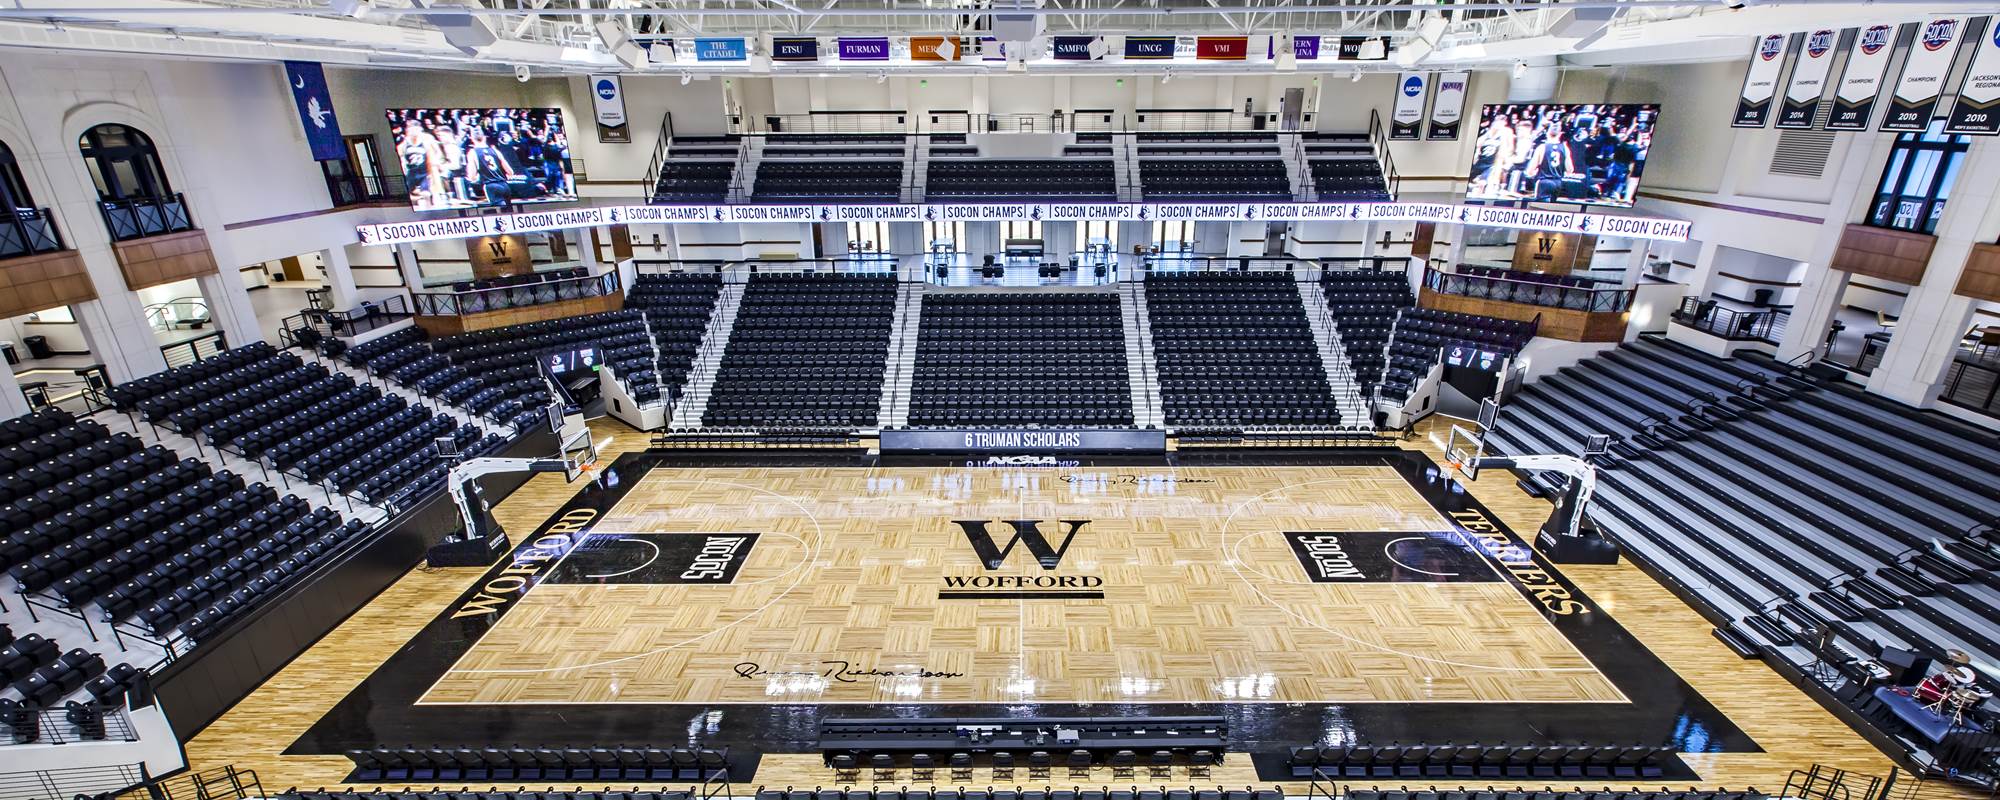 View inside the Jerry Richardson Indoor Arena at Wofford College